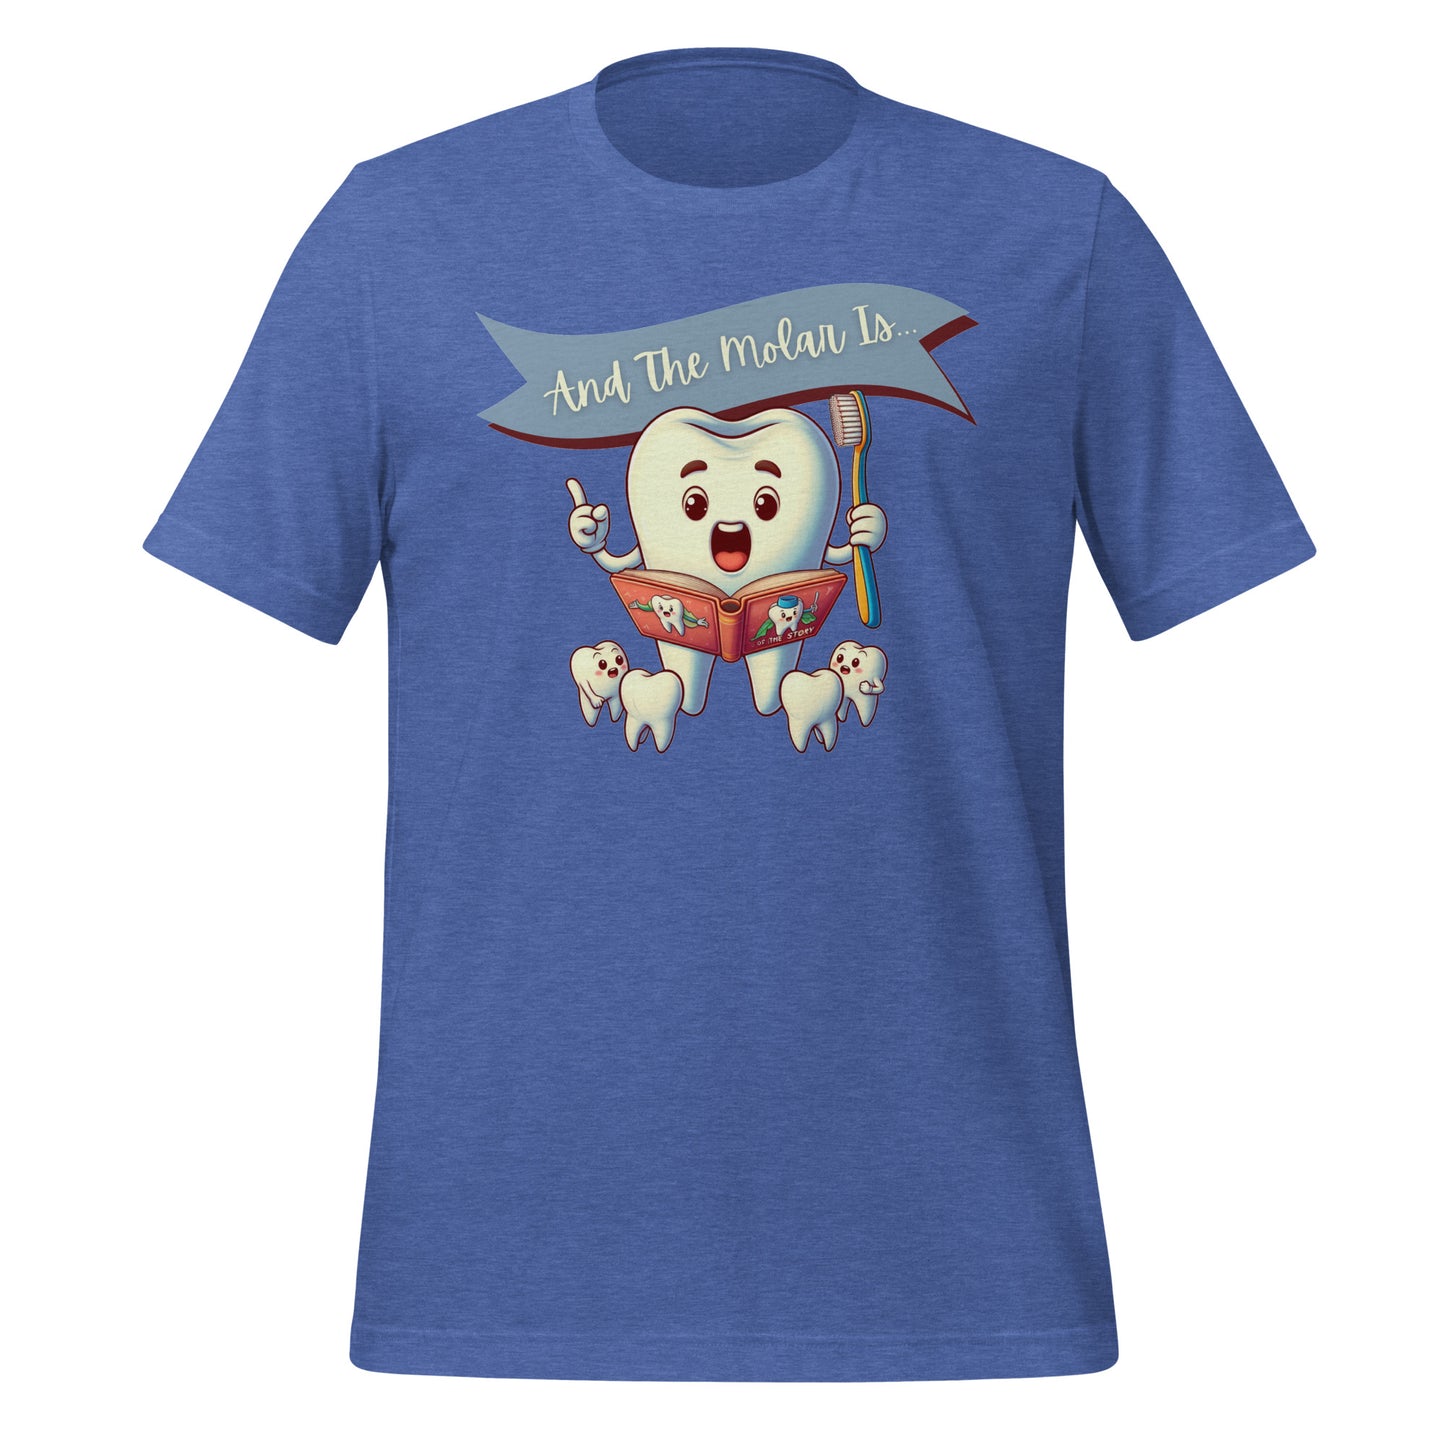 Cute dental shirt featuring a smiling tooth character reading a book with the caption ‘And The Molar Is,’ surrounded by smaller tooth characters. Heather true royal color.